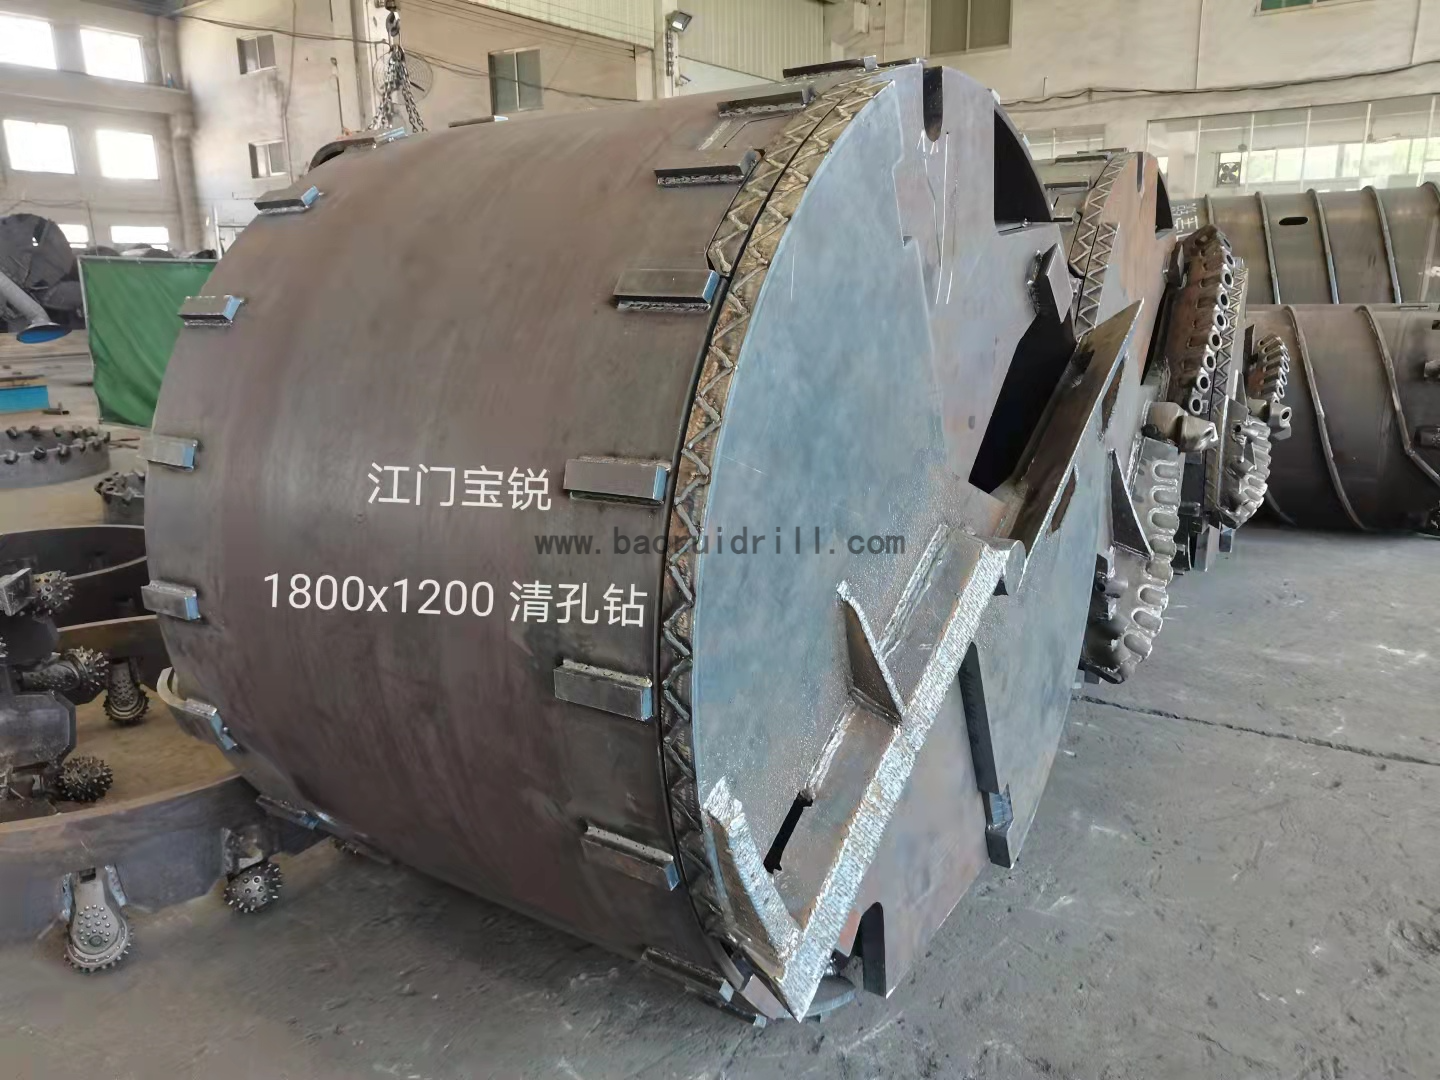 Manufacturer Wholesale Foundation Piling Cleaning Bucket Rotary Drilling Ware Parts